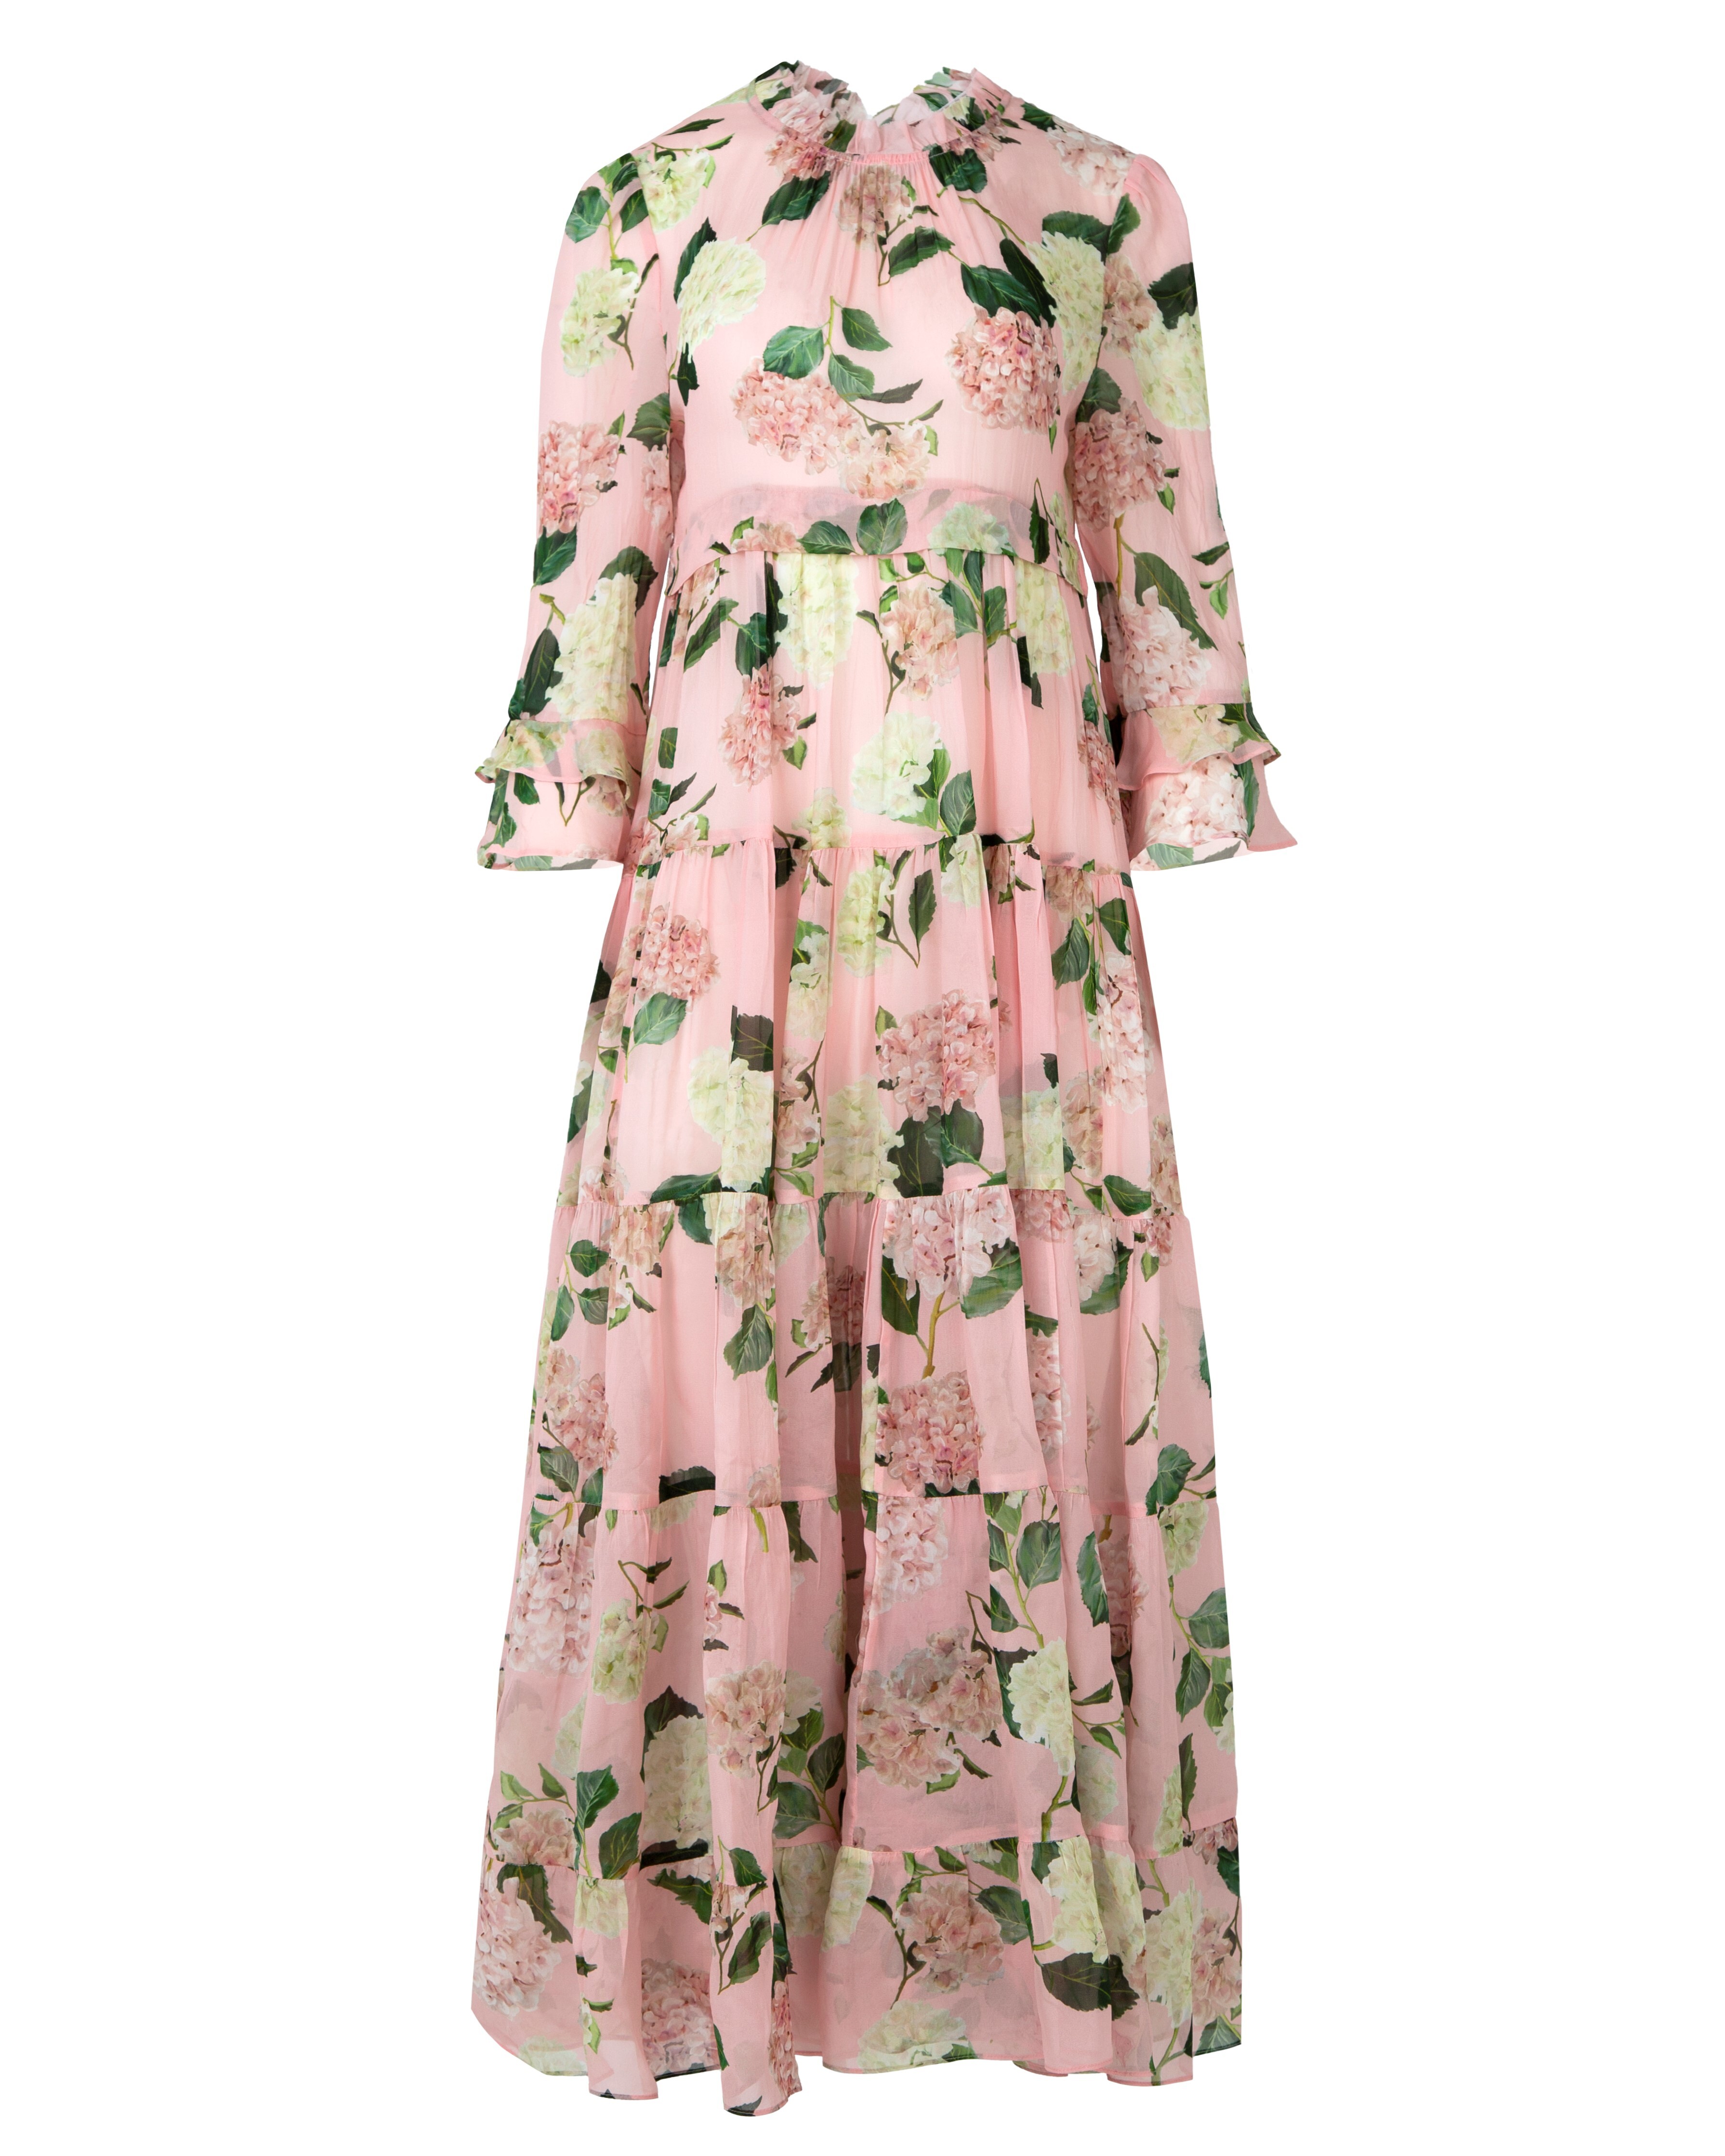 TIERS OF AN ANGEL DRESS (PINK FLORAL)- TRELISE COOPER SUMMER 21 Boxing ...